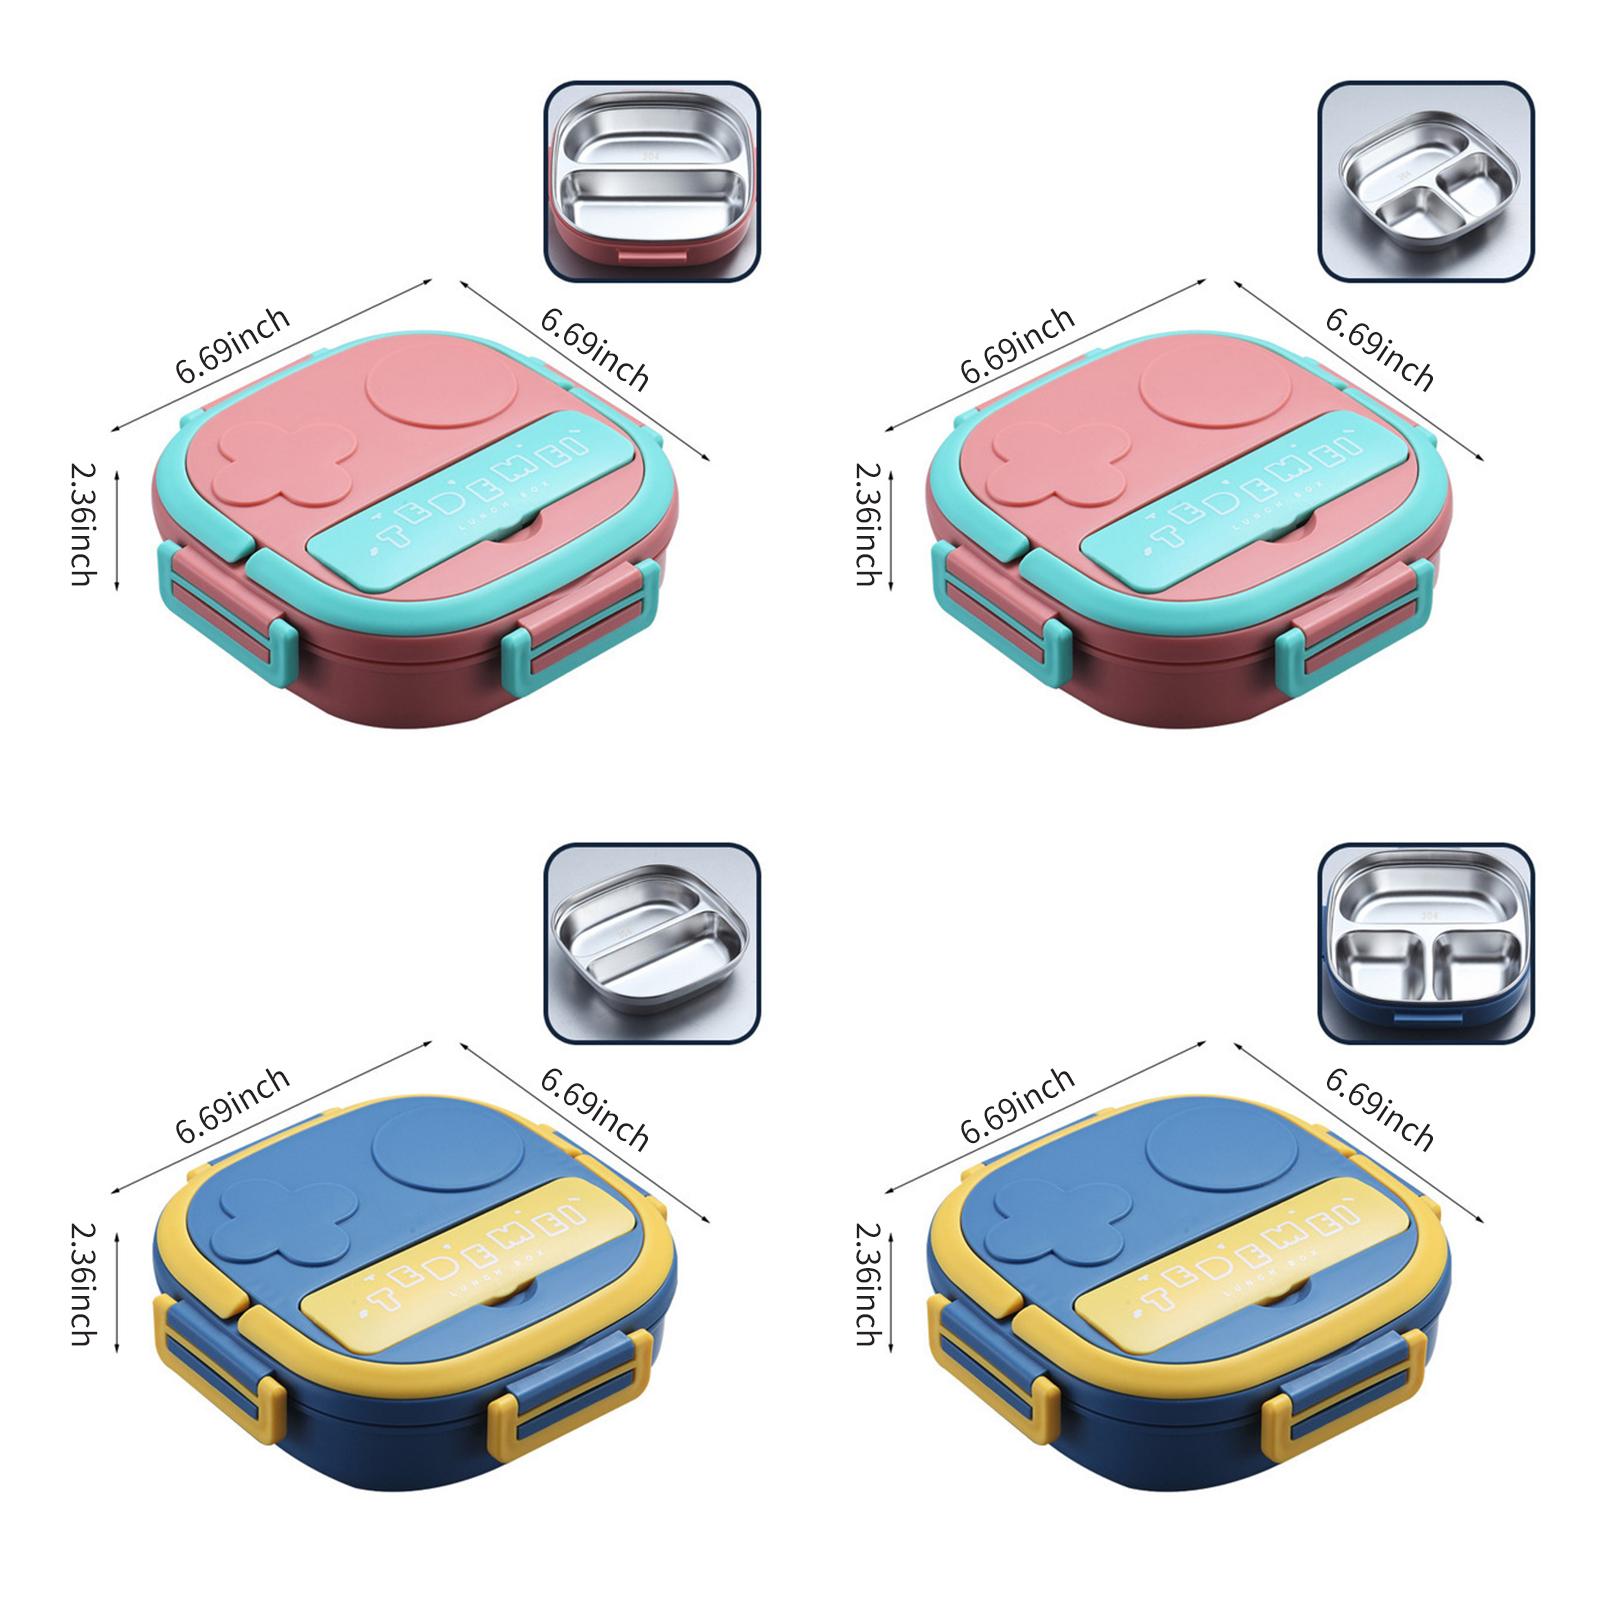 Lunch Box With Fork 3 Compartment Japanese Lunch Box Reusable Lunch Dinner Container Leakproof Stainless Steel Bento Box